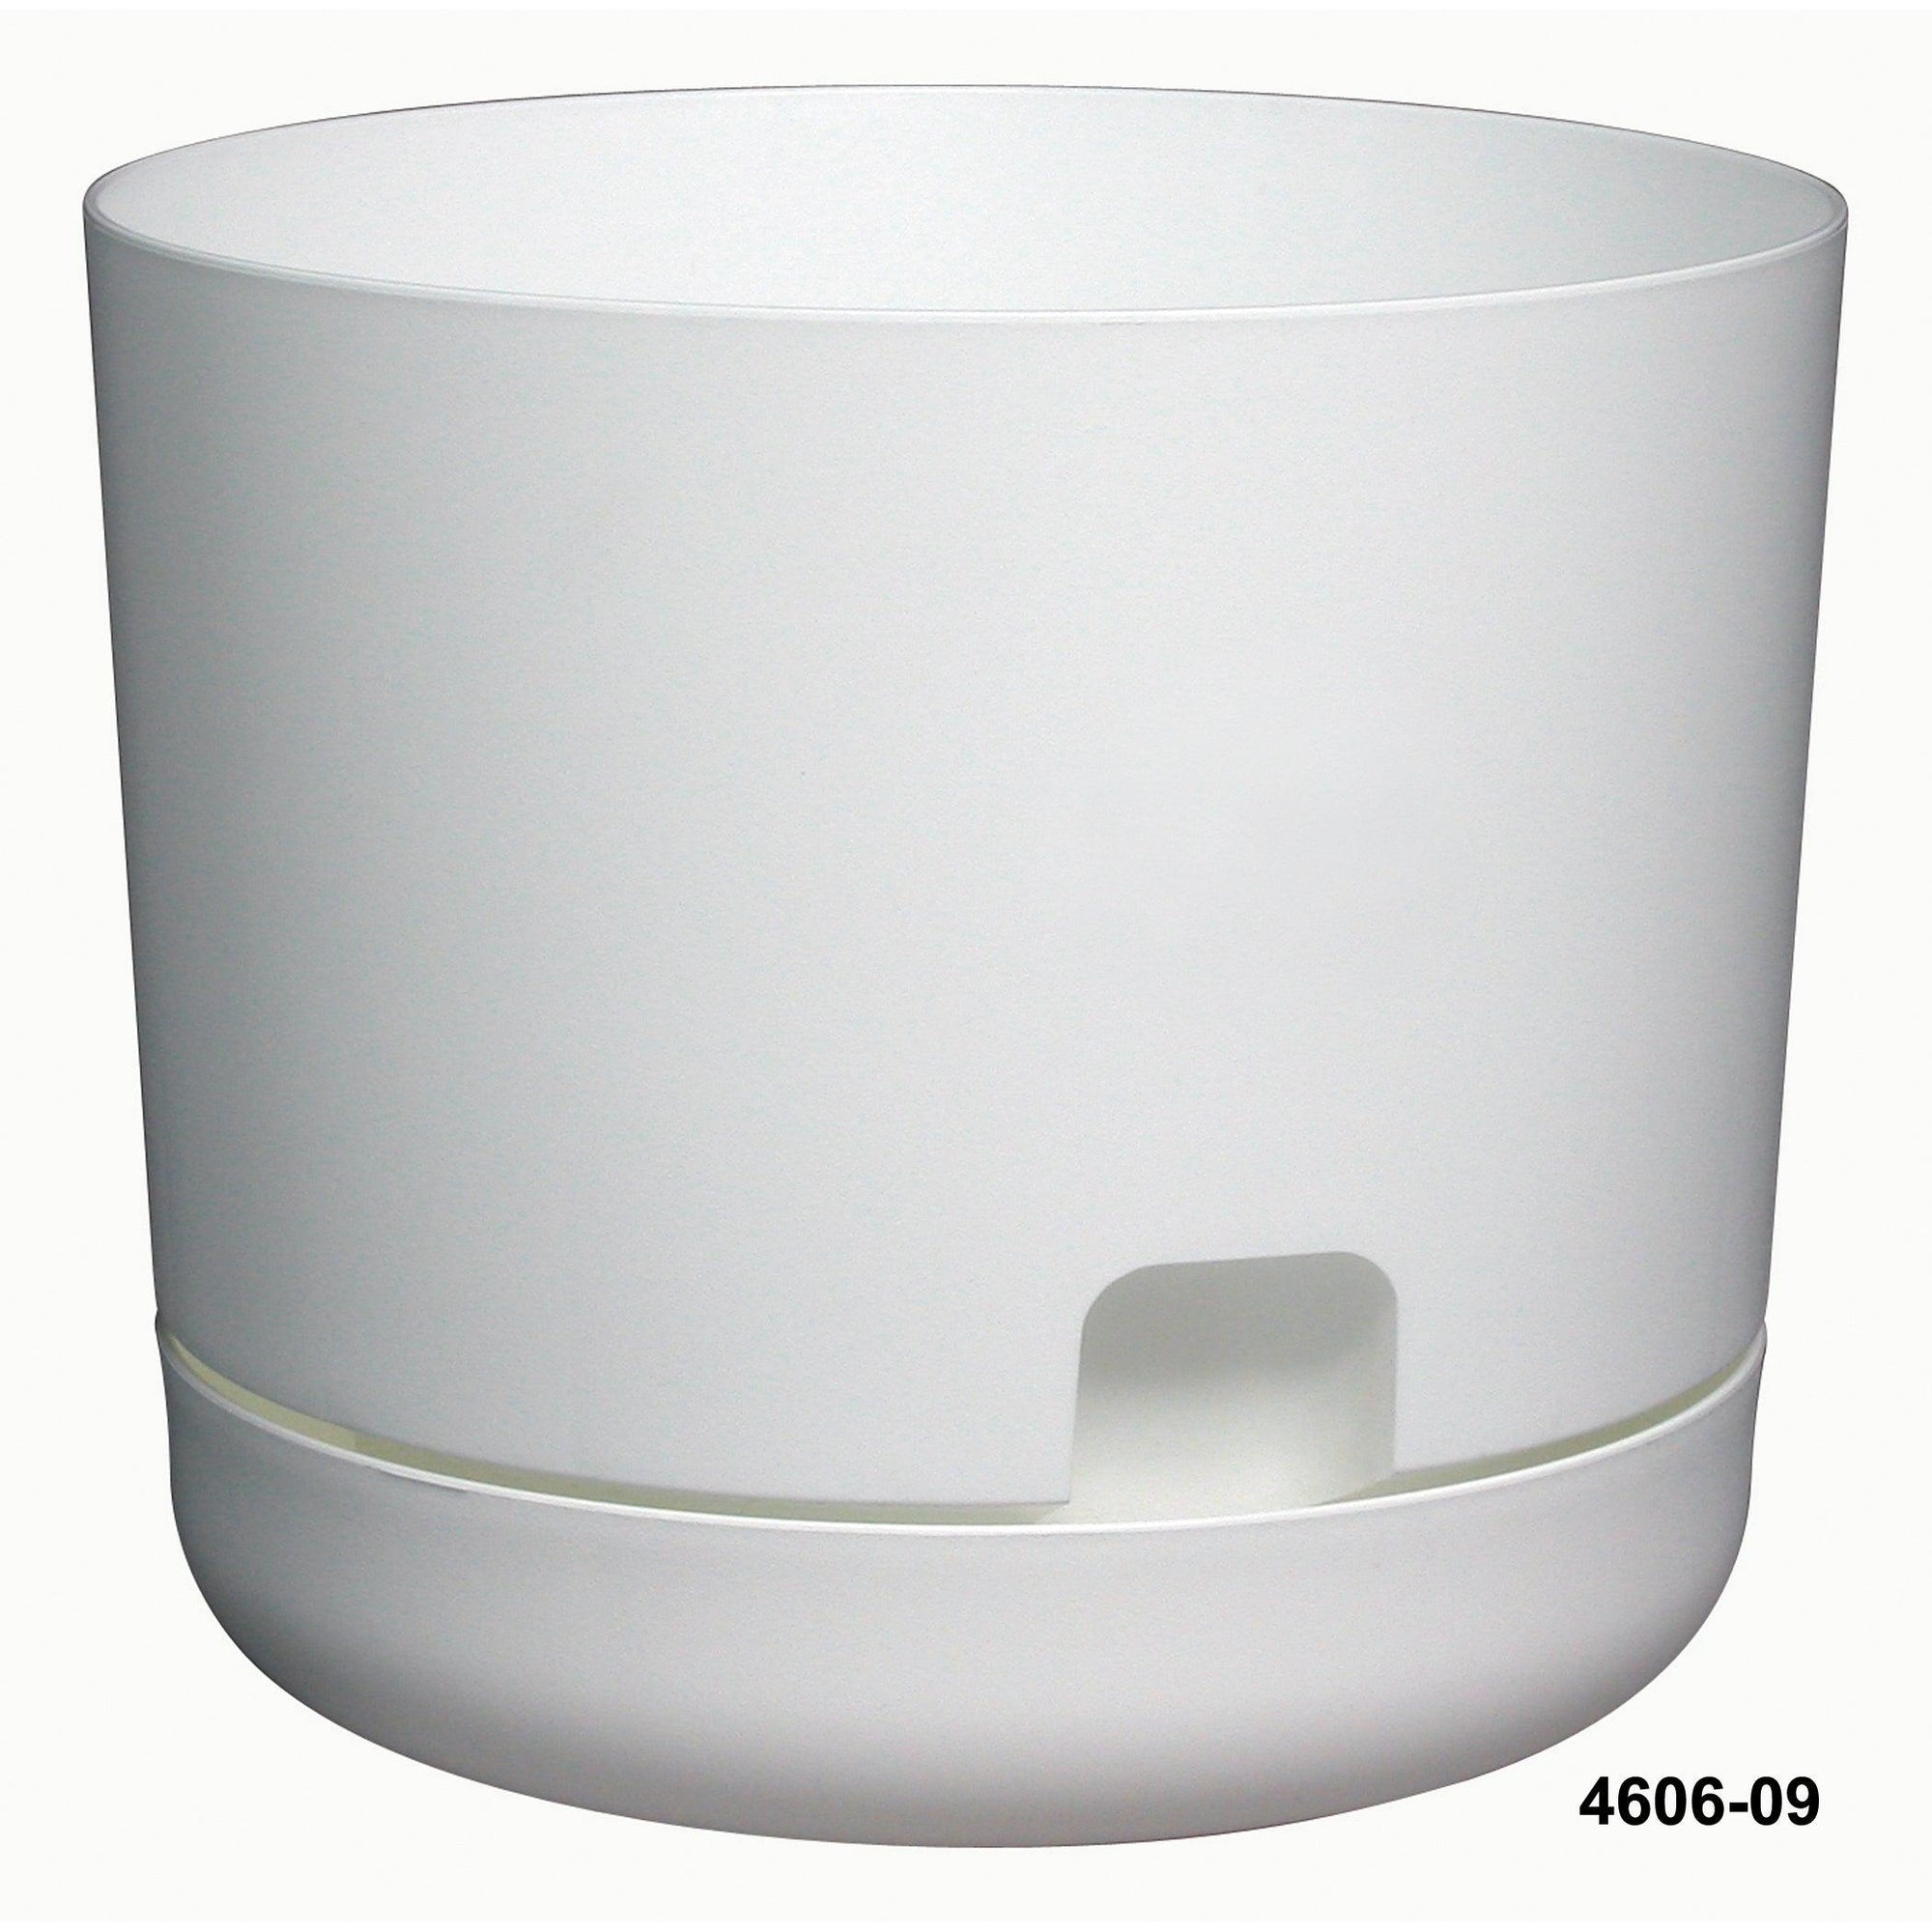 Oasis Self Watering Planter with Saucer White